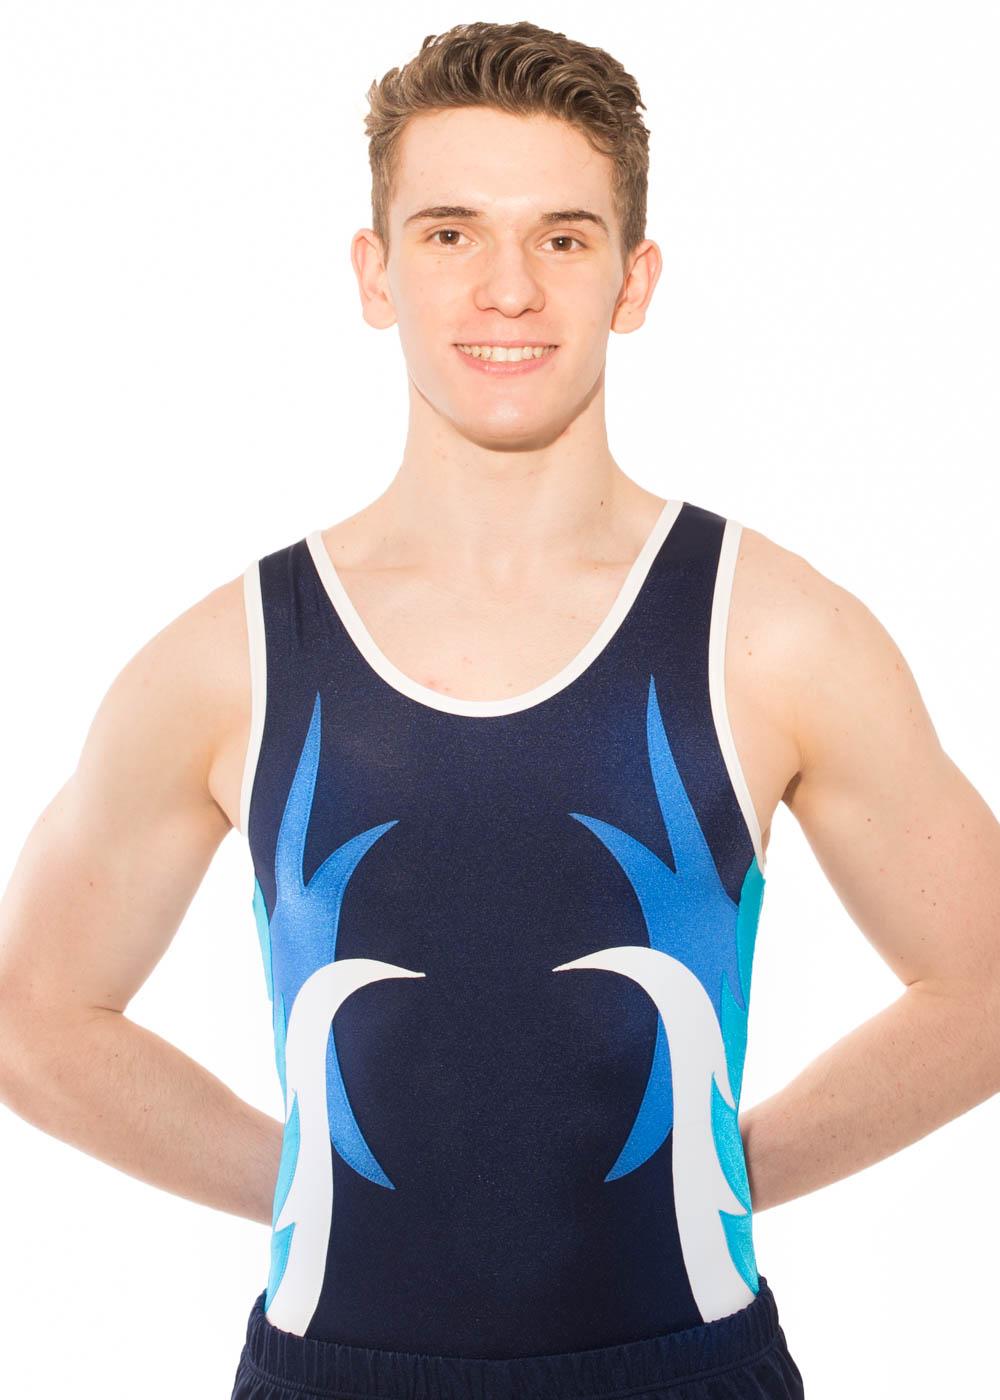 WREN -BV478:- Mens Sleeveless Leotard with Blue and White side details ...